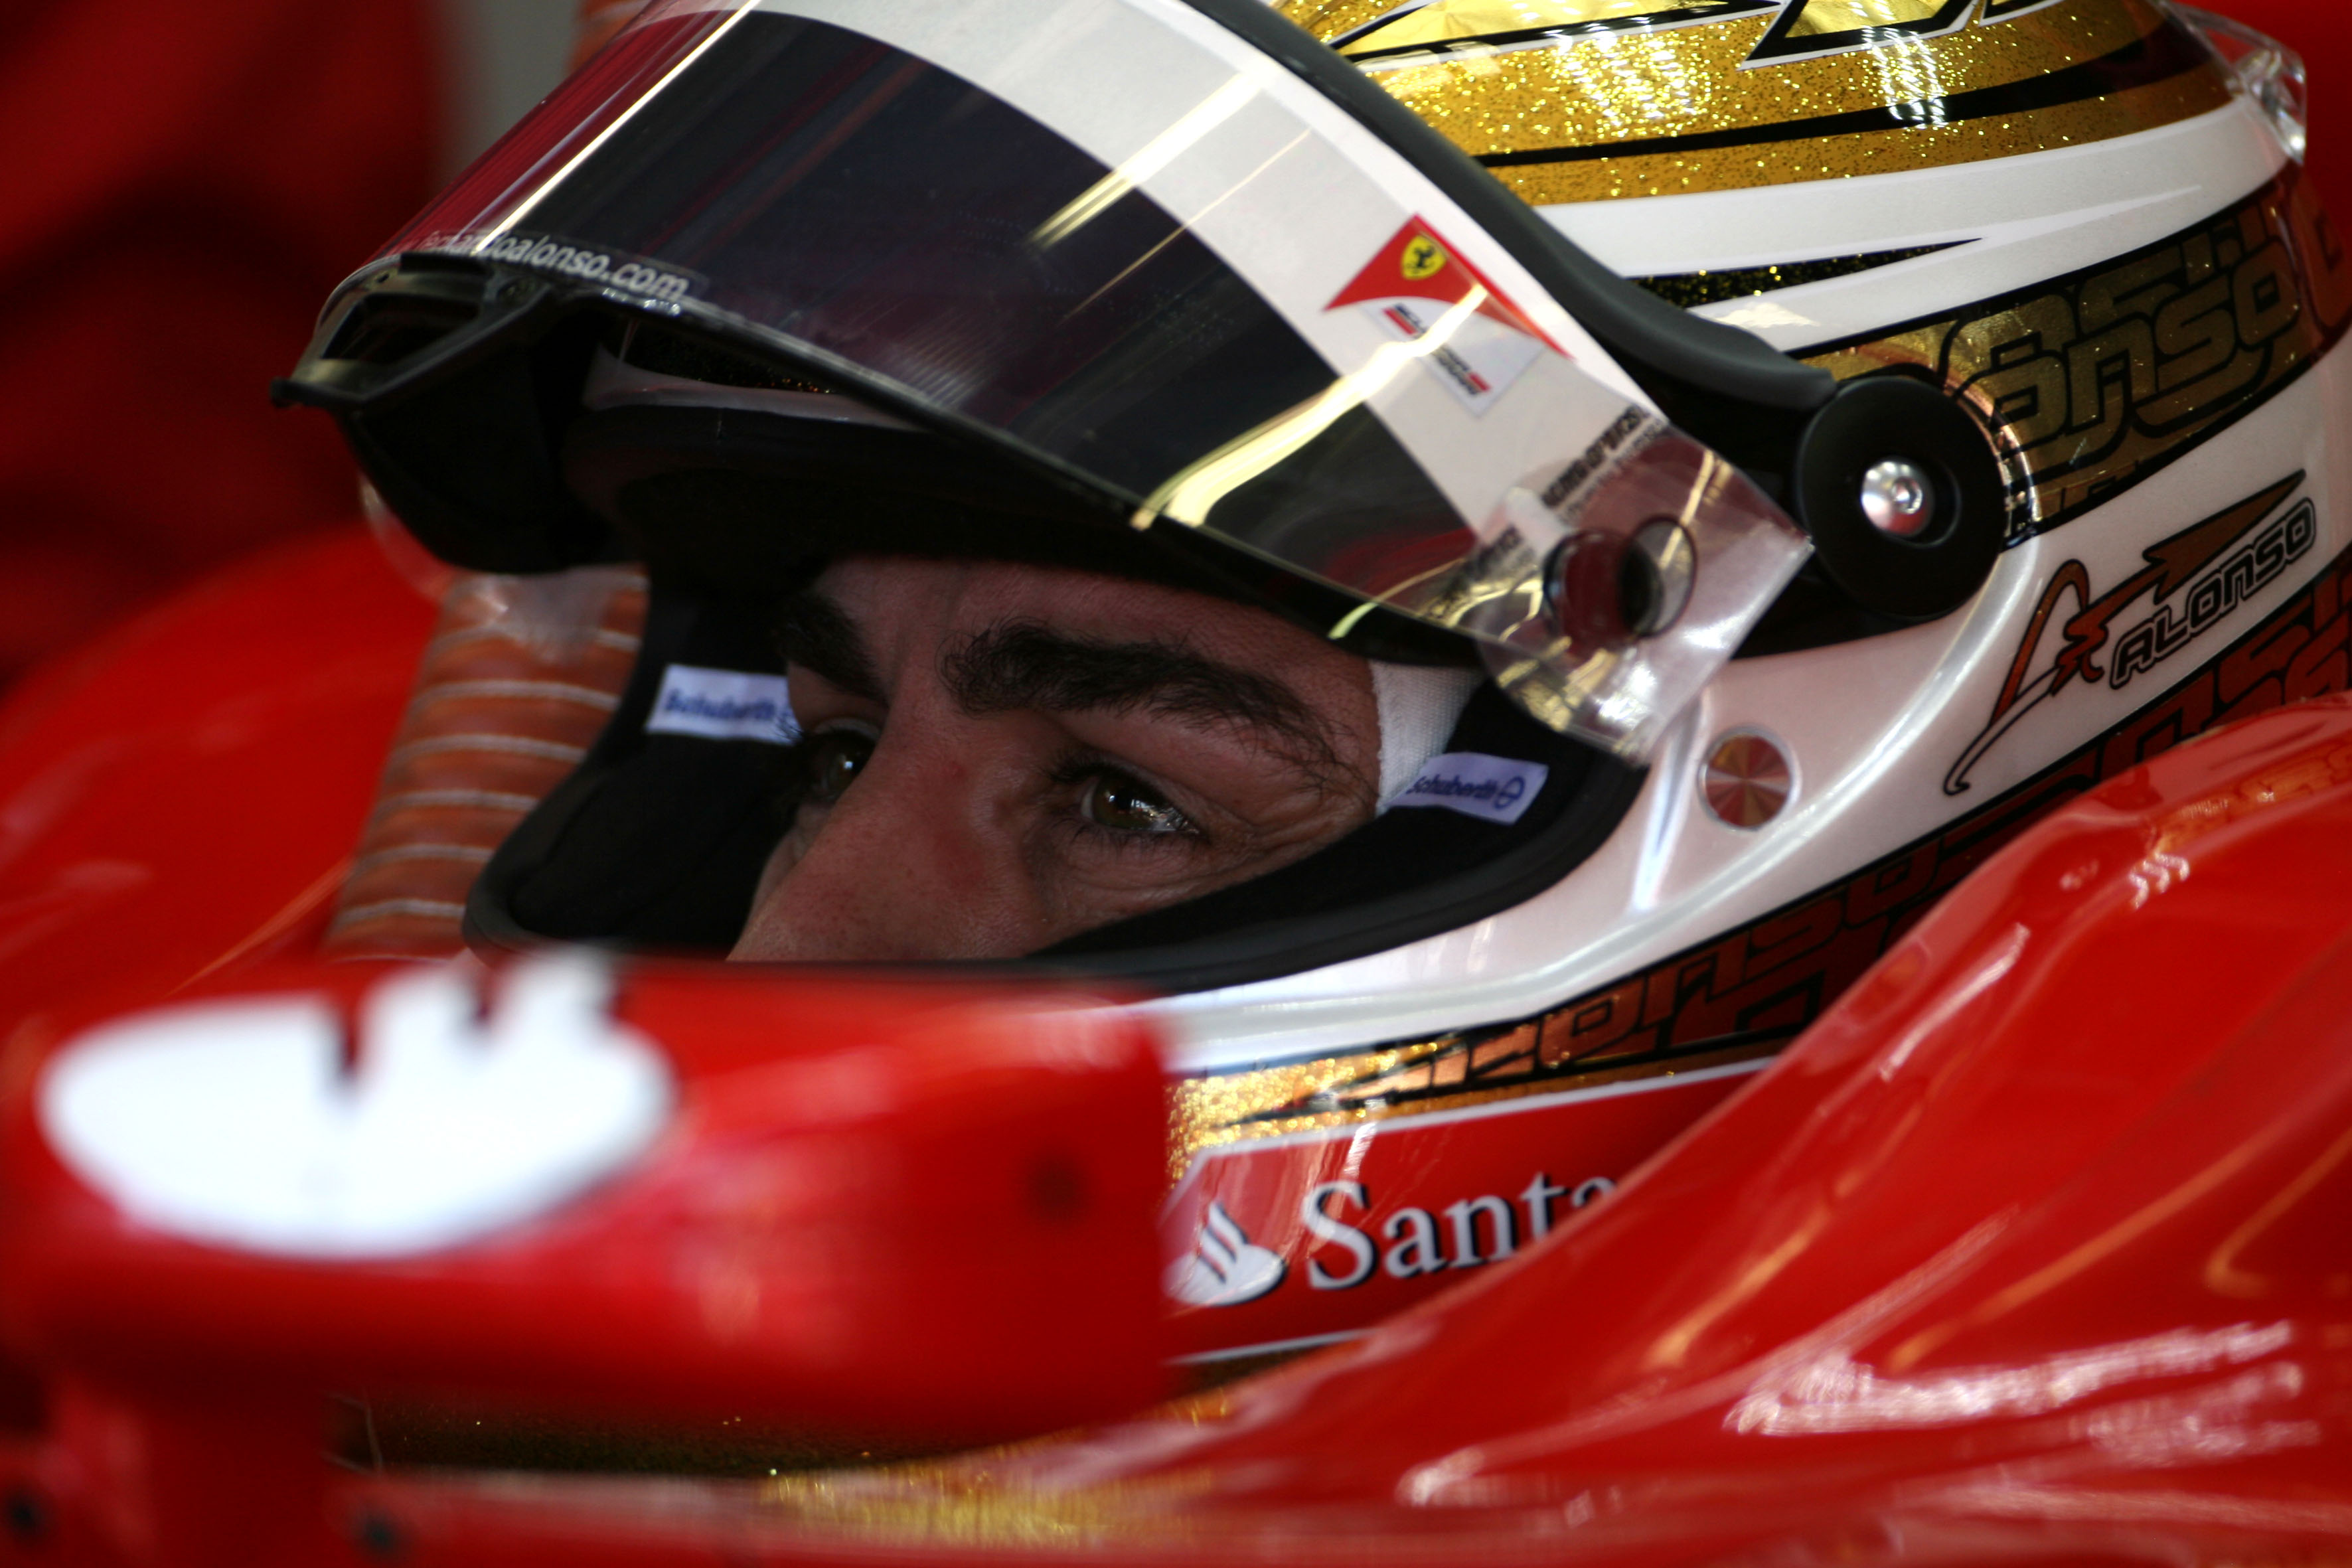 VT2: Alonso neemt over